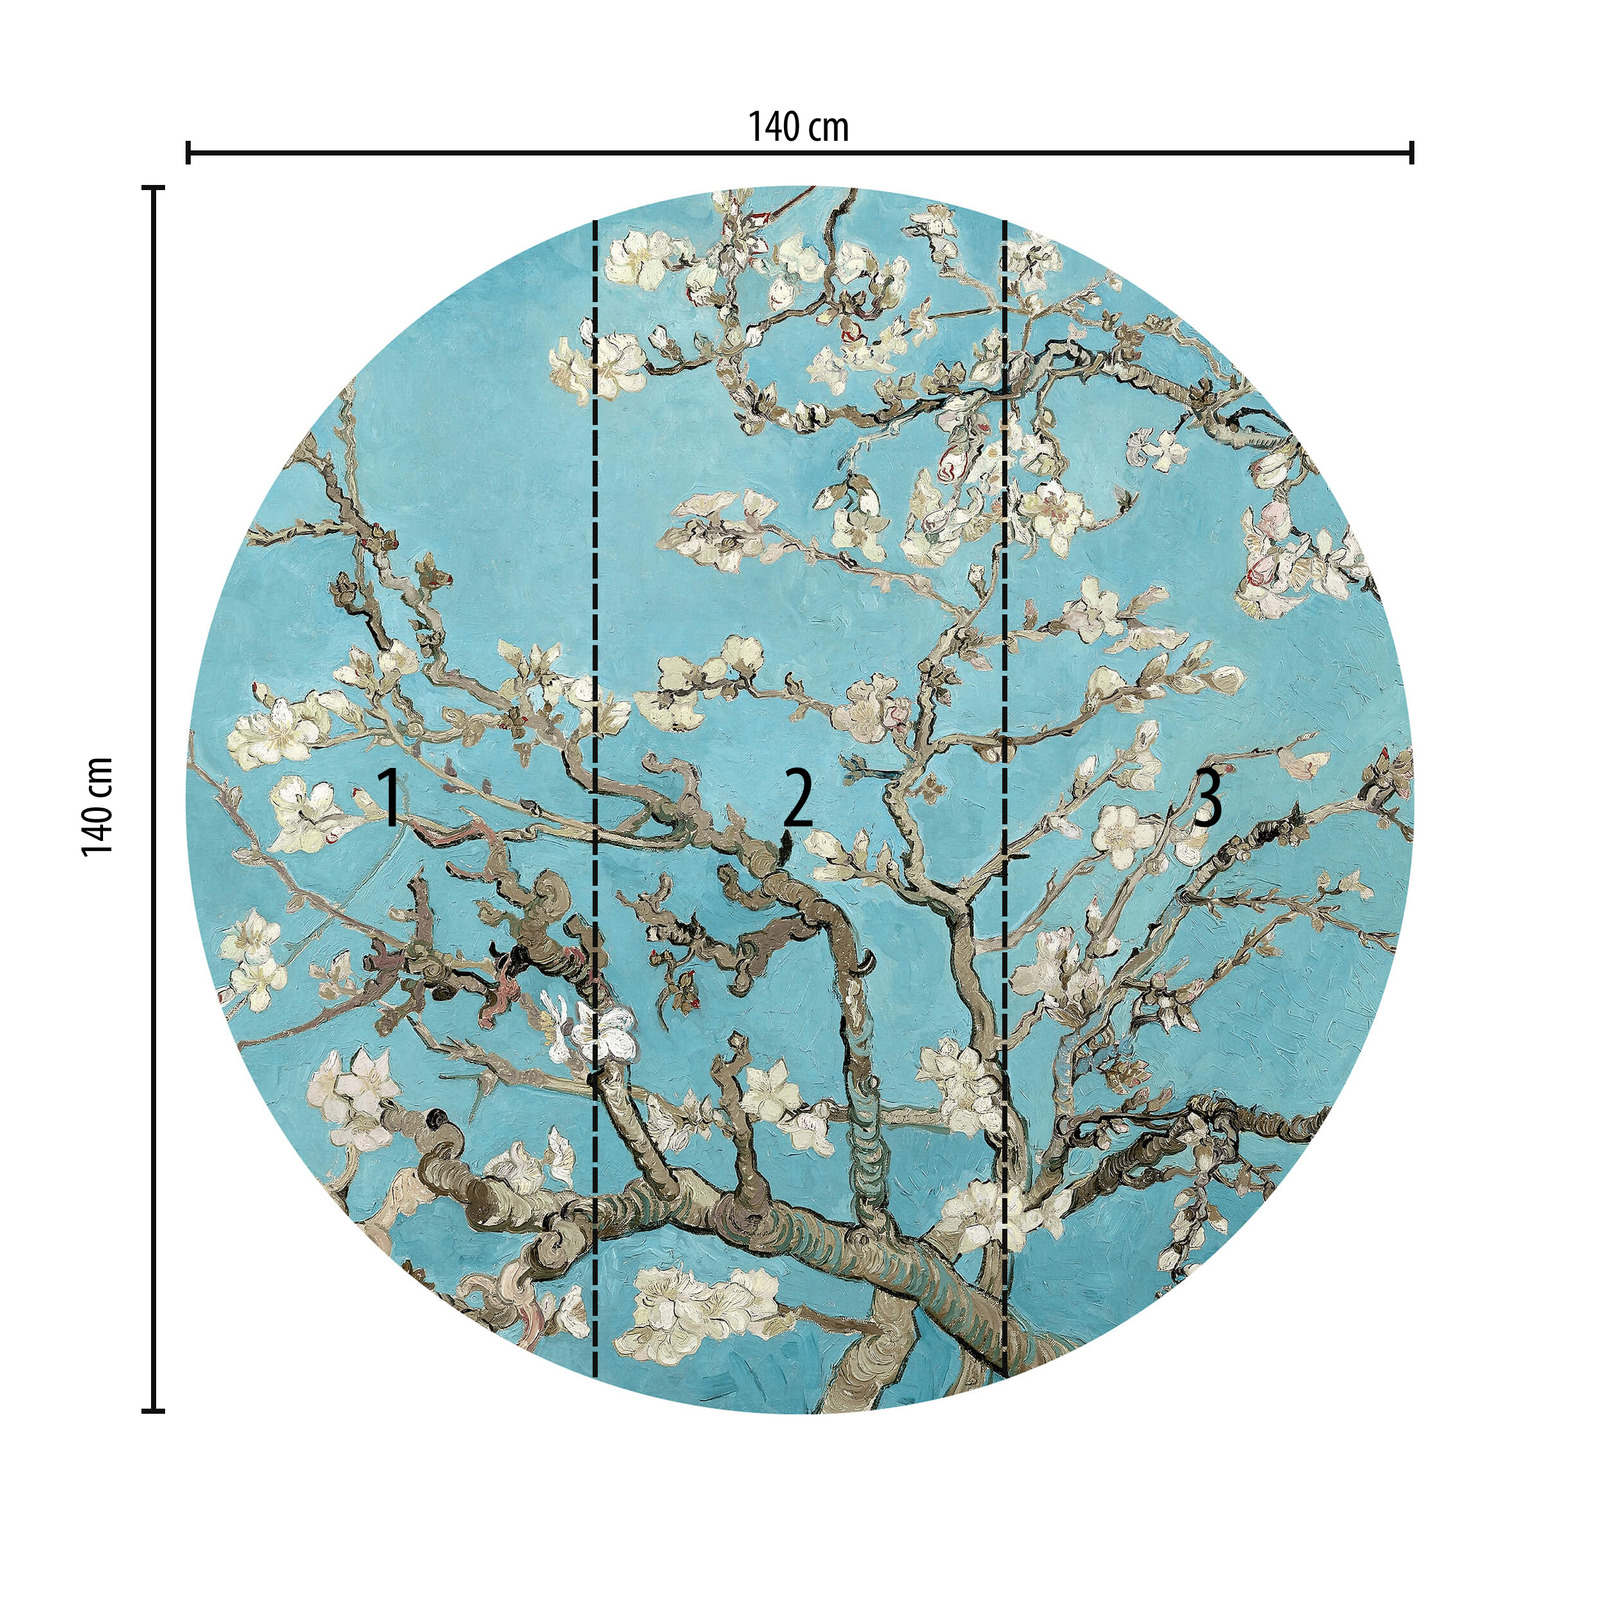             Round photo wallpaper almond blossoms in blue and white
        